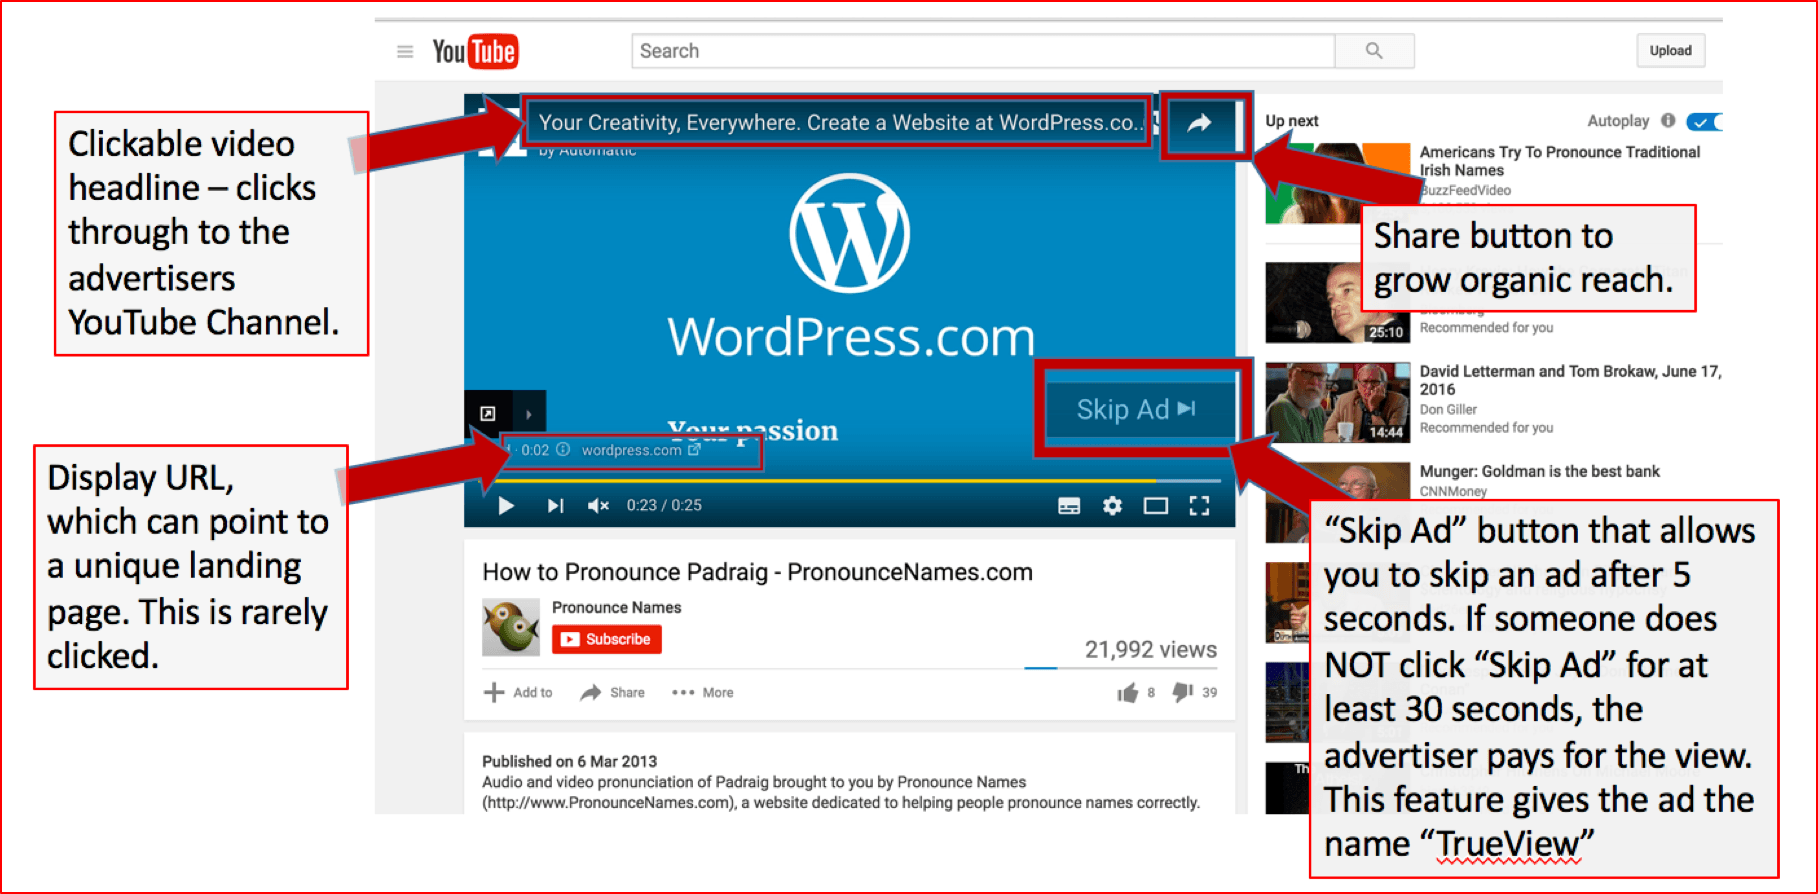 A screenshot of an in=stream YouTube ad highlights the features within this digital marketing ad type.